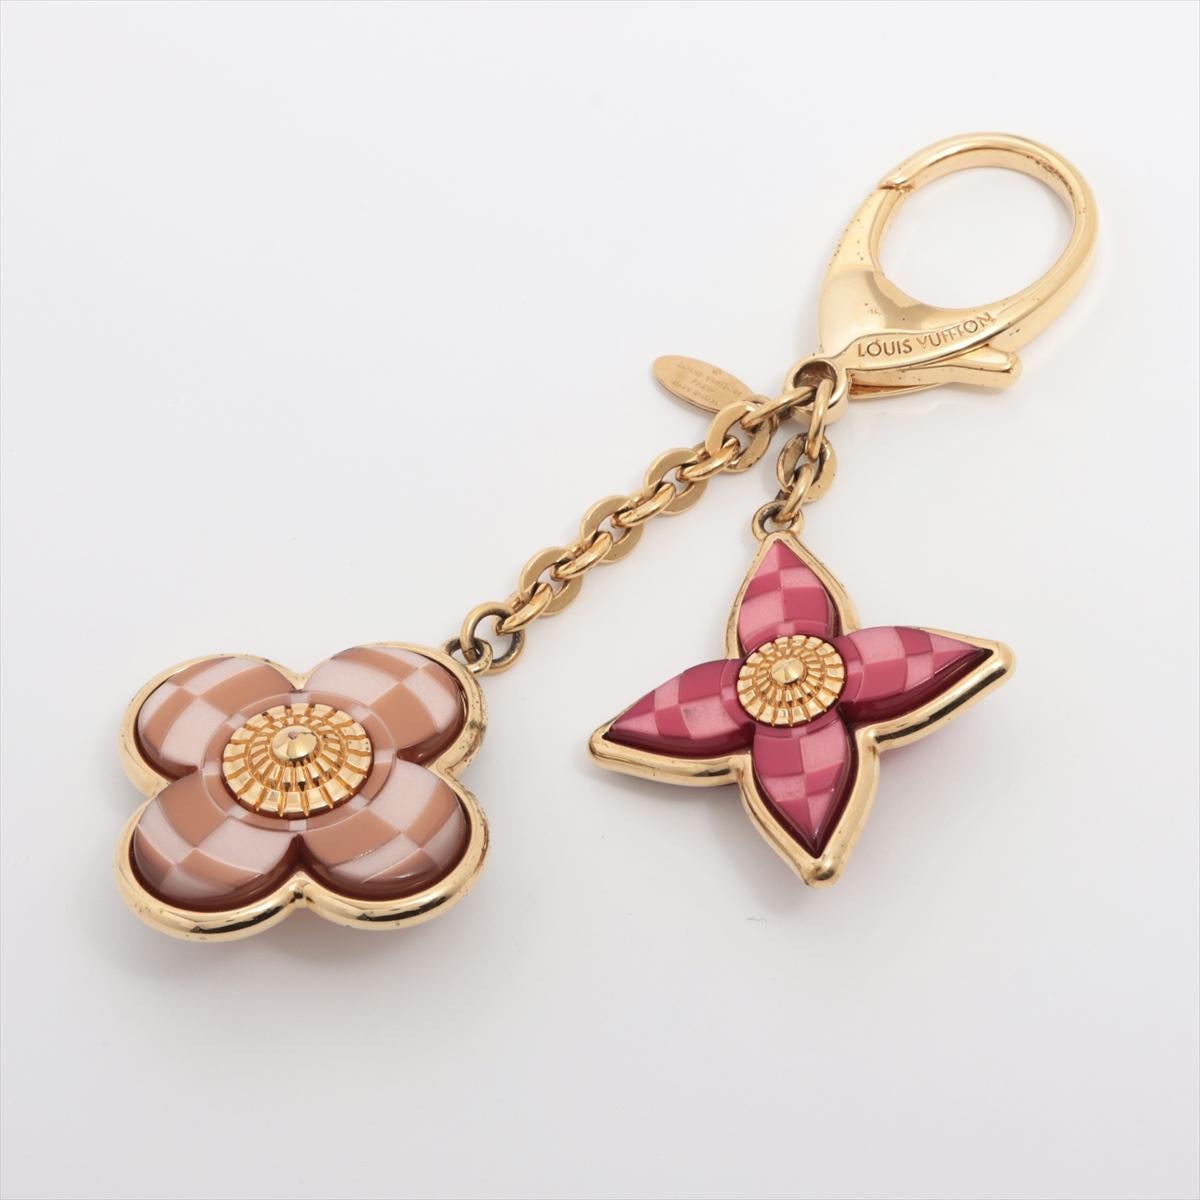 The Louis Vuitton LV Mosaic Flower Bicolor Bag Charm is a captivating and distinctive accessory that reflects the brand's commitment to luxury and innovation. The bag charm features a striking mosaic flower design with the gold-toned at its center.